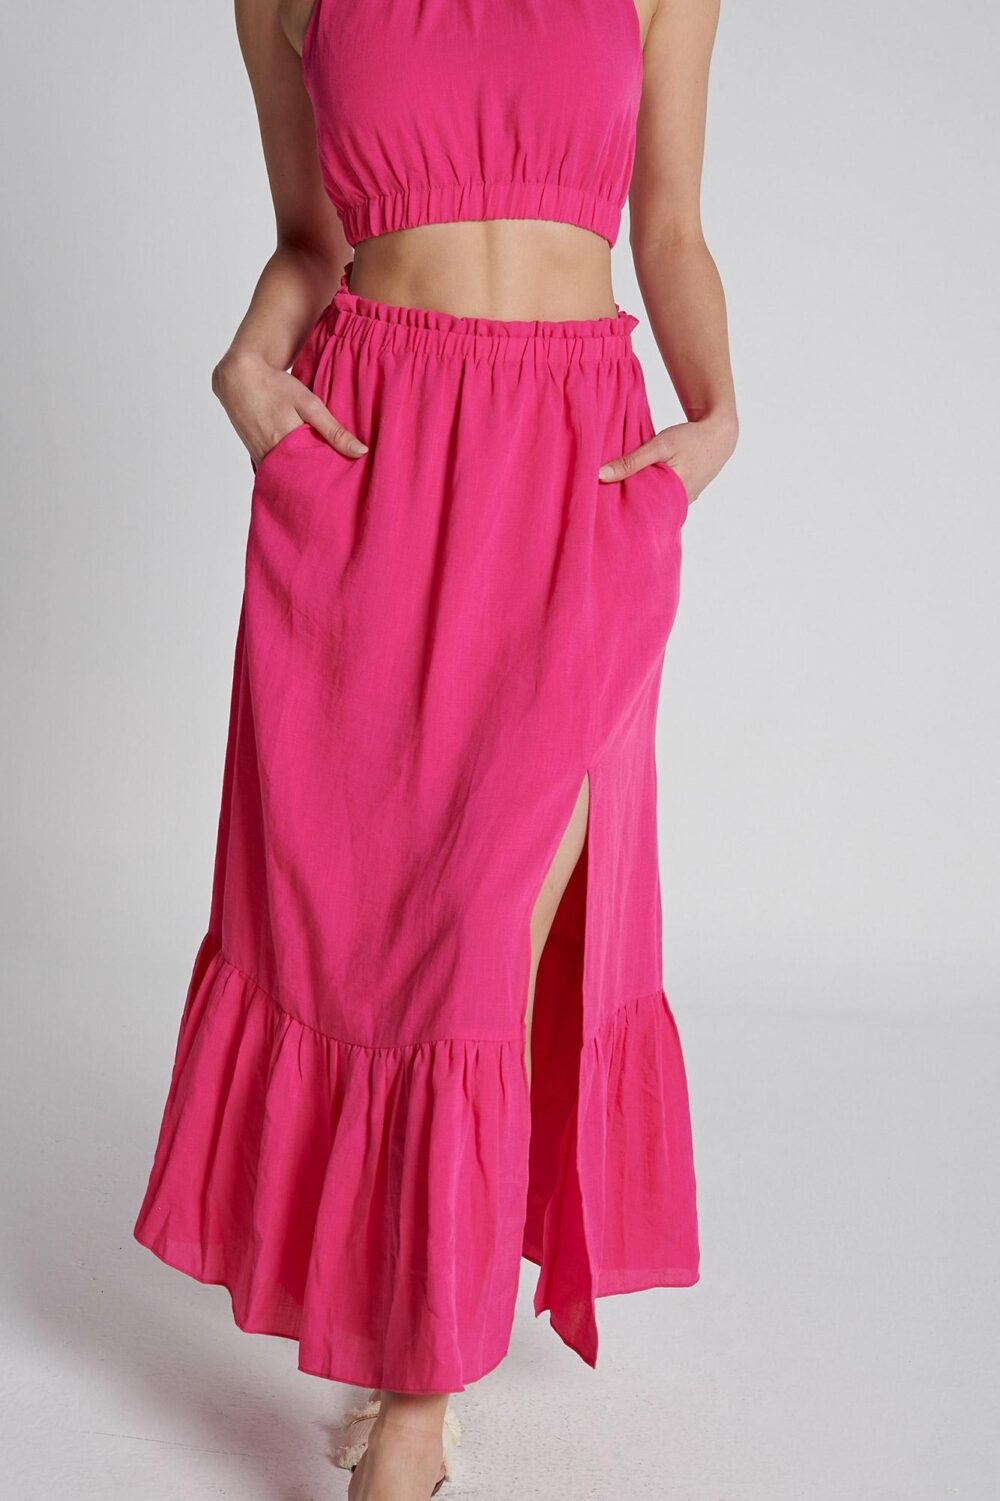 Ladies Skirt Colour is Pink